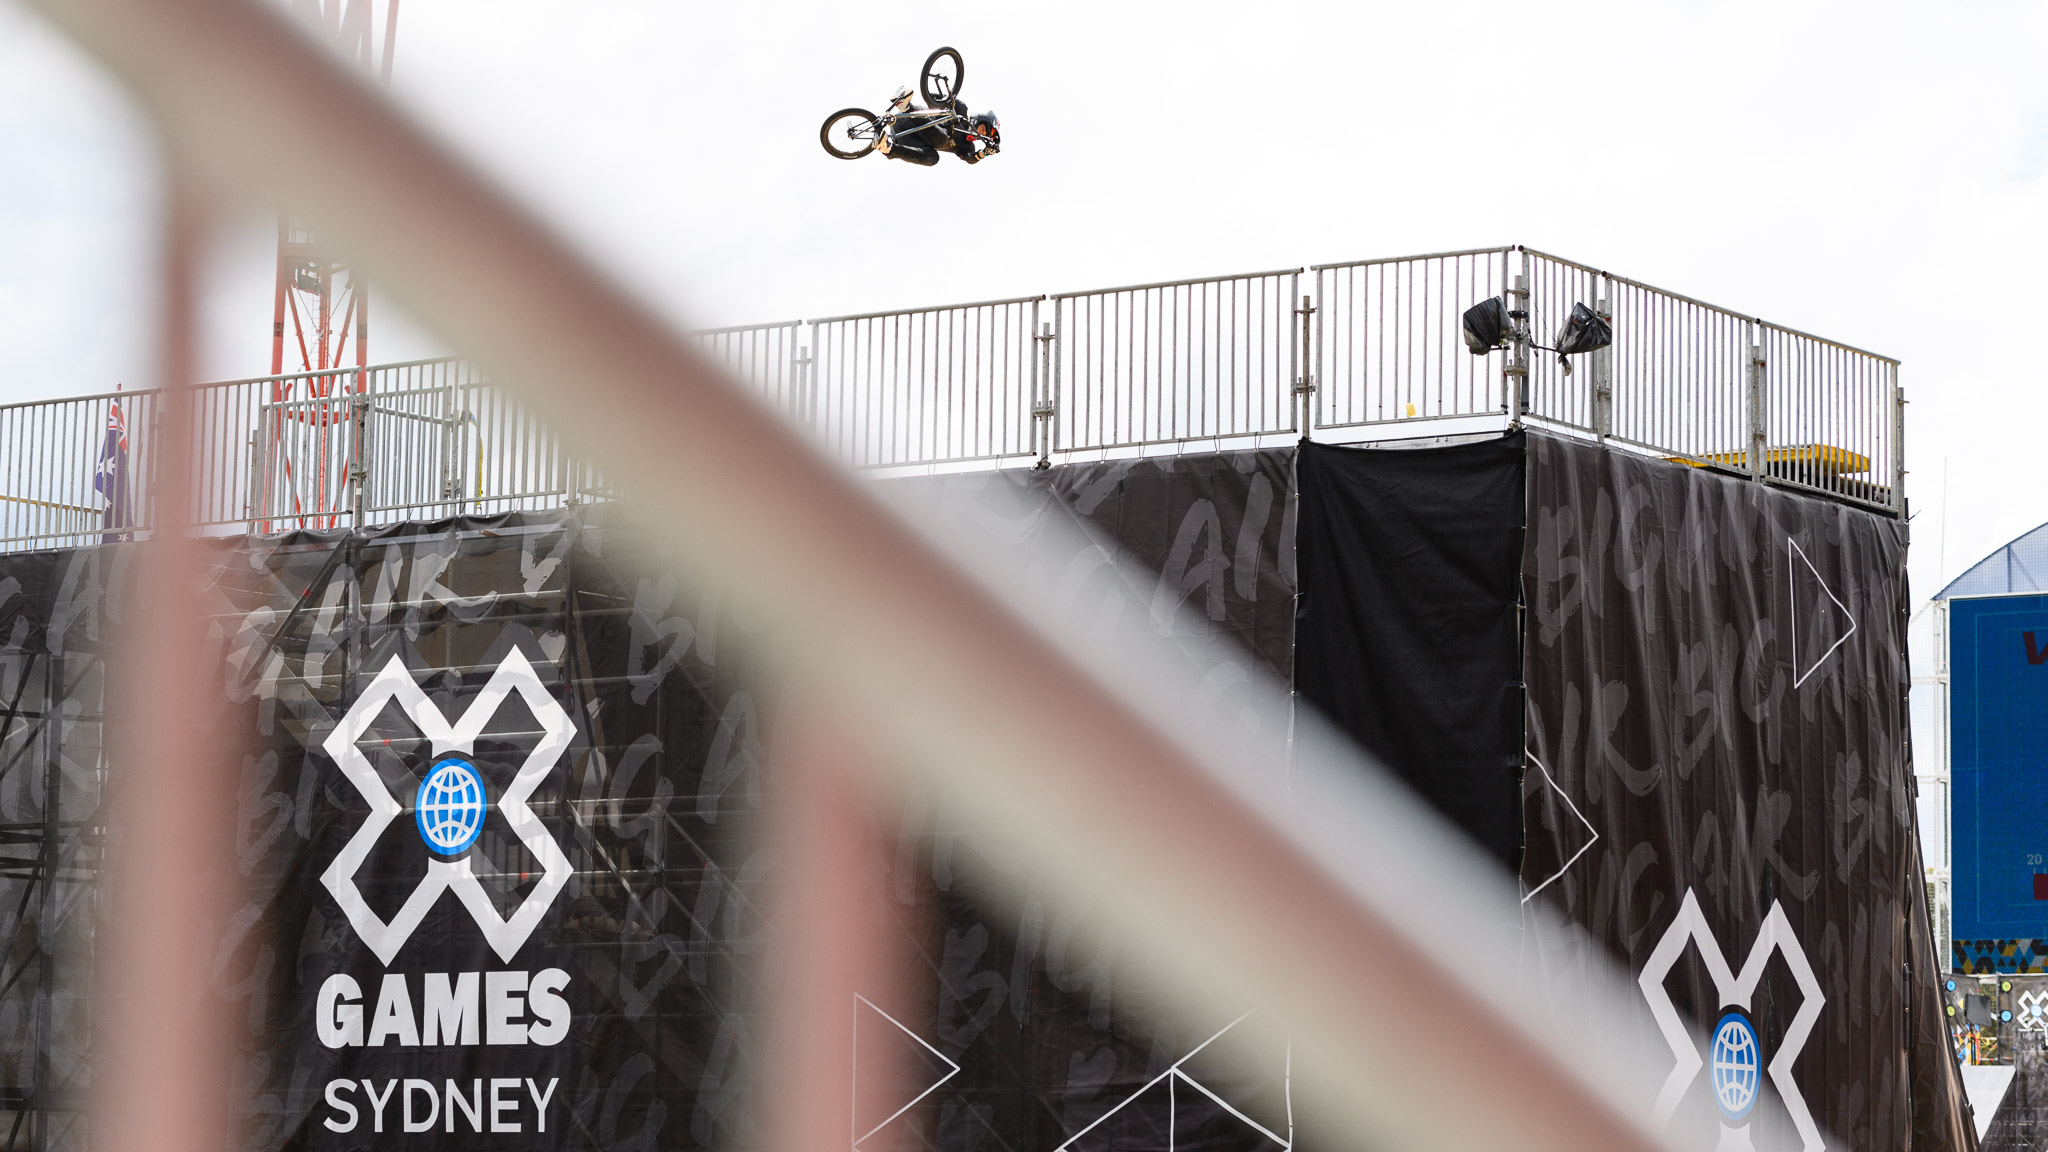 Welcome to X Games Sydney 2018